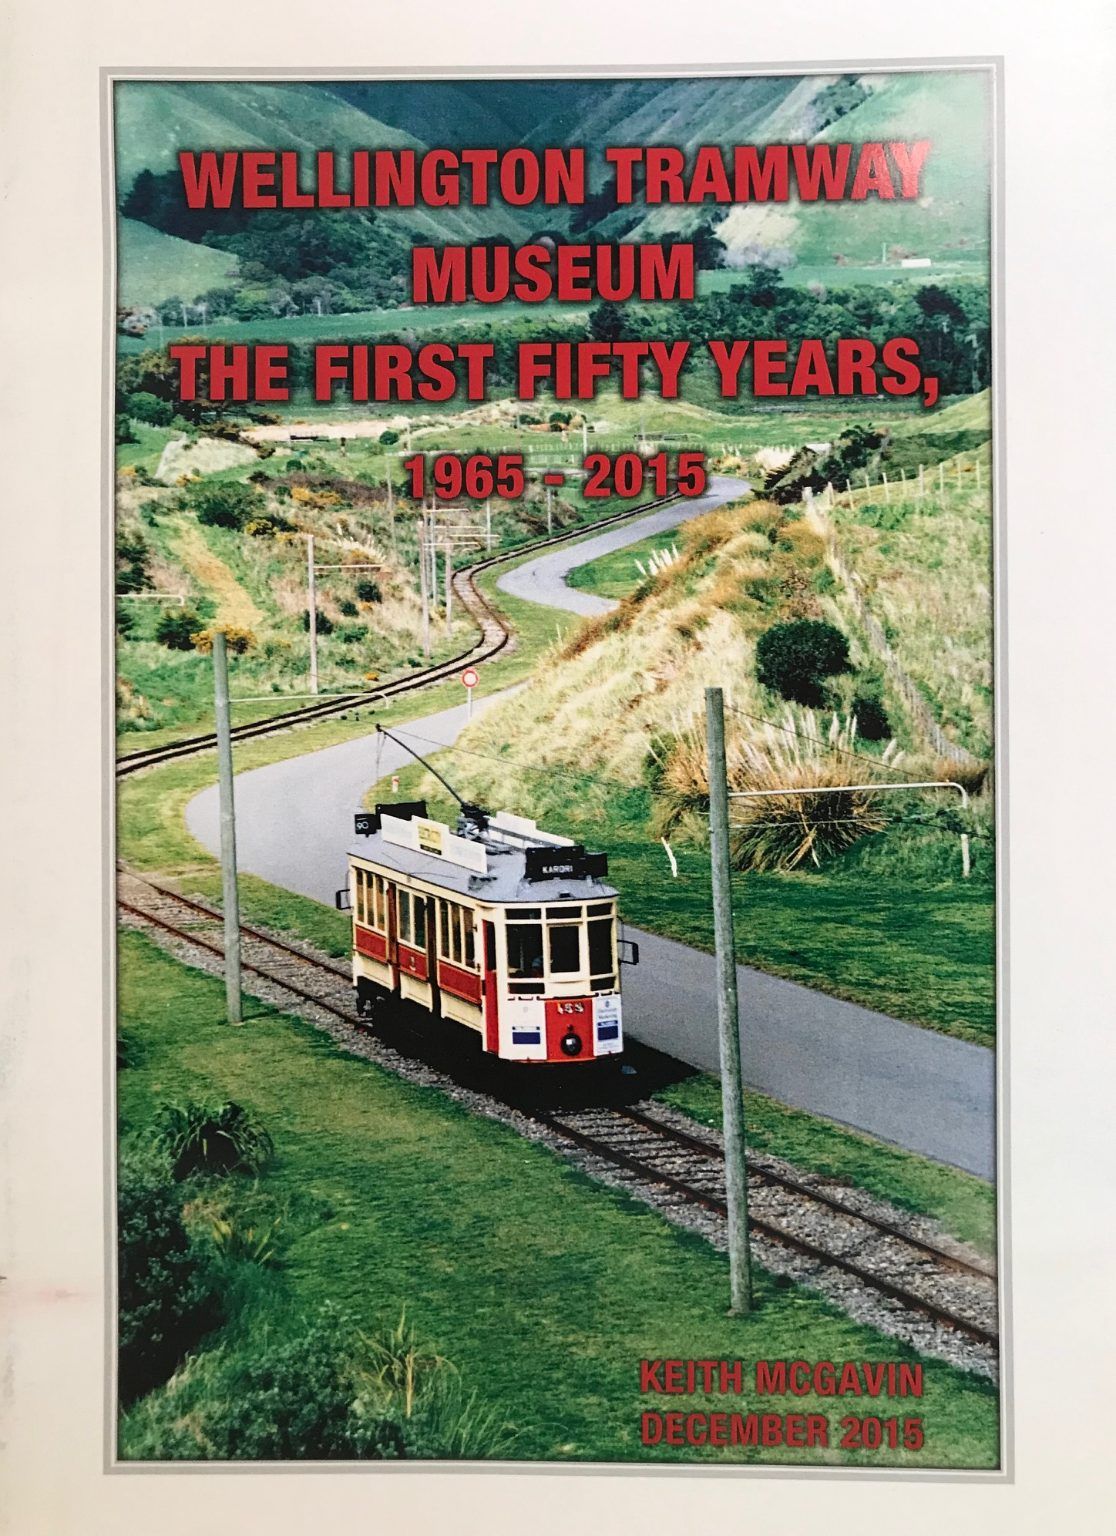 WELLINGTON TRAMWAY MUSEUM: The First Fifty Years 1965-2015